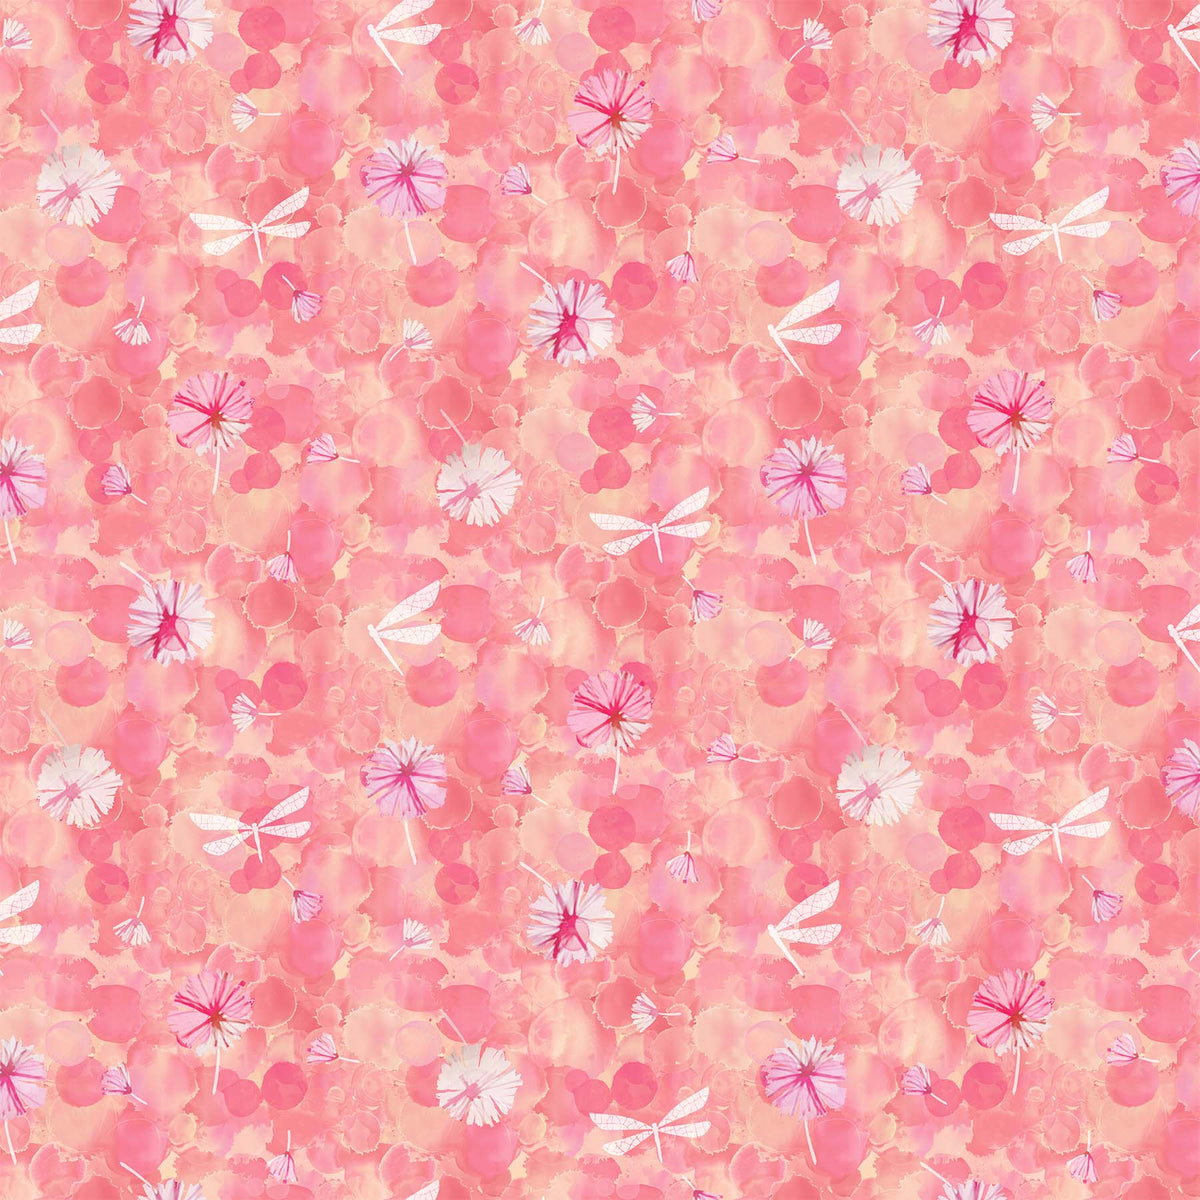 Dragonfly Dreams Quilt Fabric - Floral and Dragonfly in Peach/Multi - DP24830-51